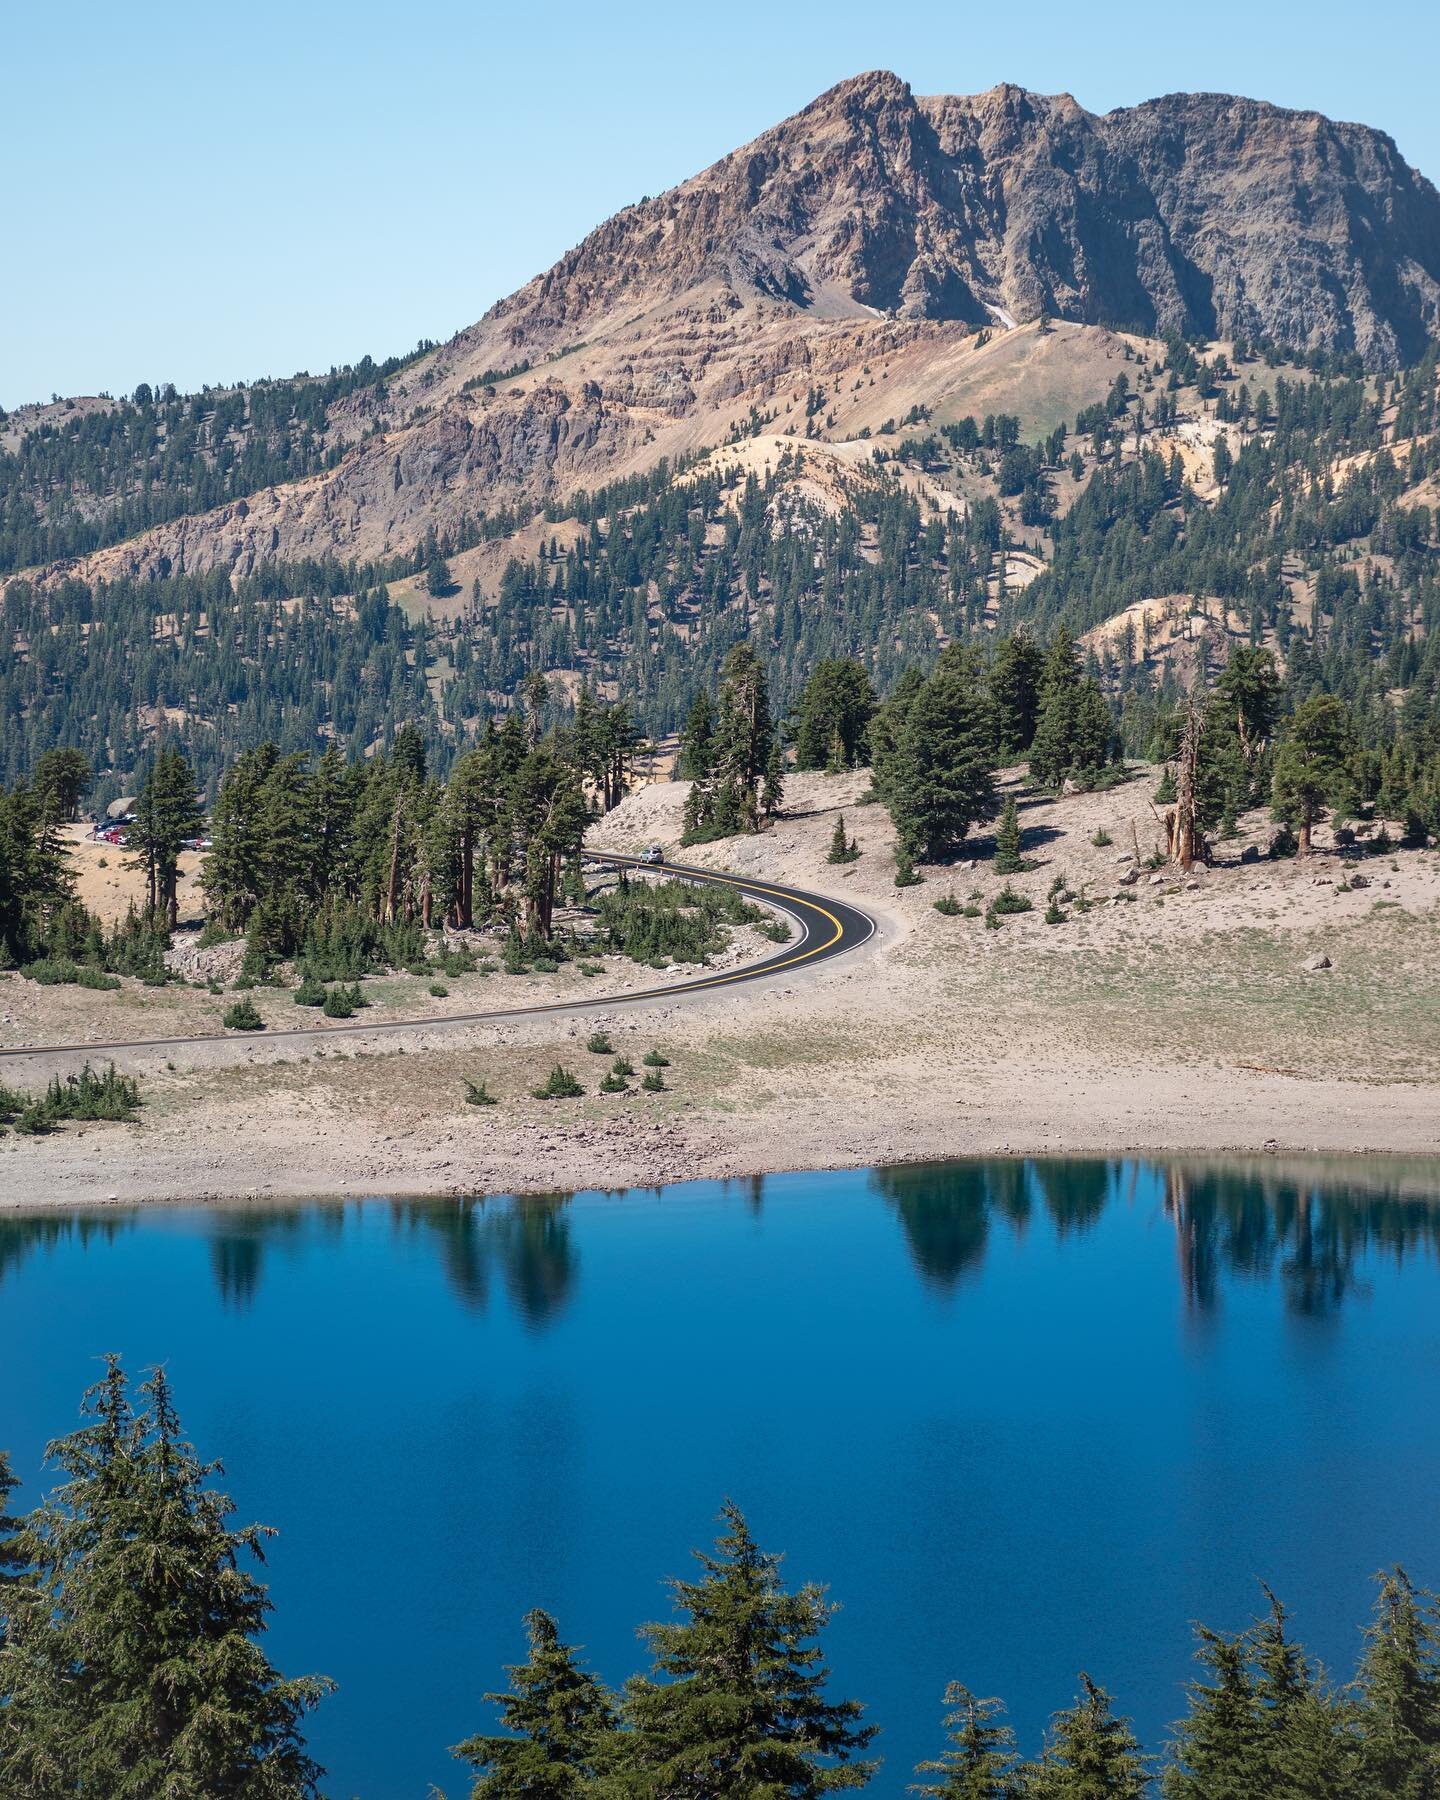 All I need is an open road and a National Park 📍Lassen Volcanic National Park
.
.
.
.
.

#photography #photographer #photooftheday #travel #igtravel #igdaily #nikon #nikonphotography #nikond5600 #nikonphotographer #landscapephotography #travelphotog